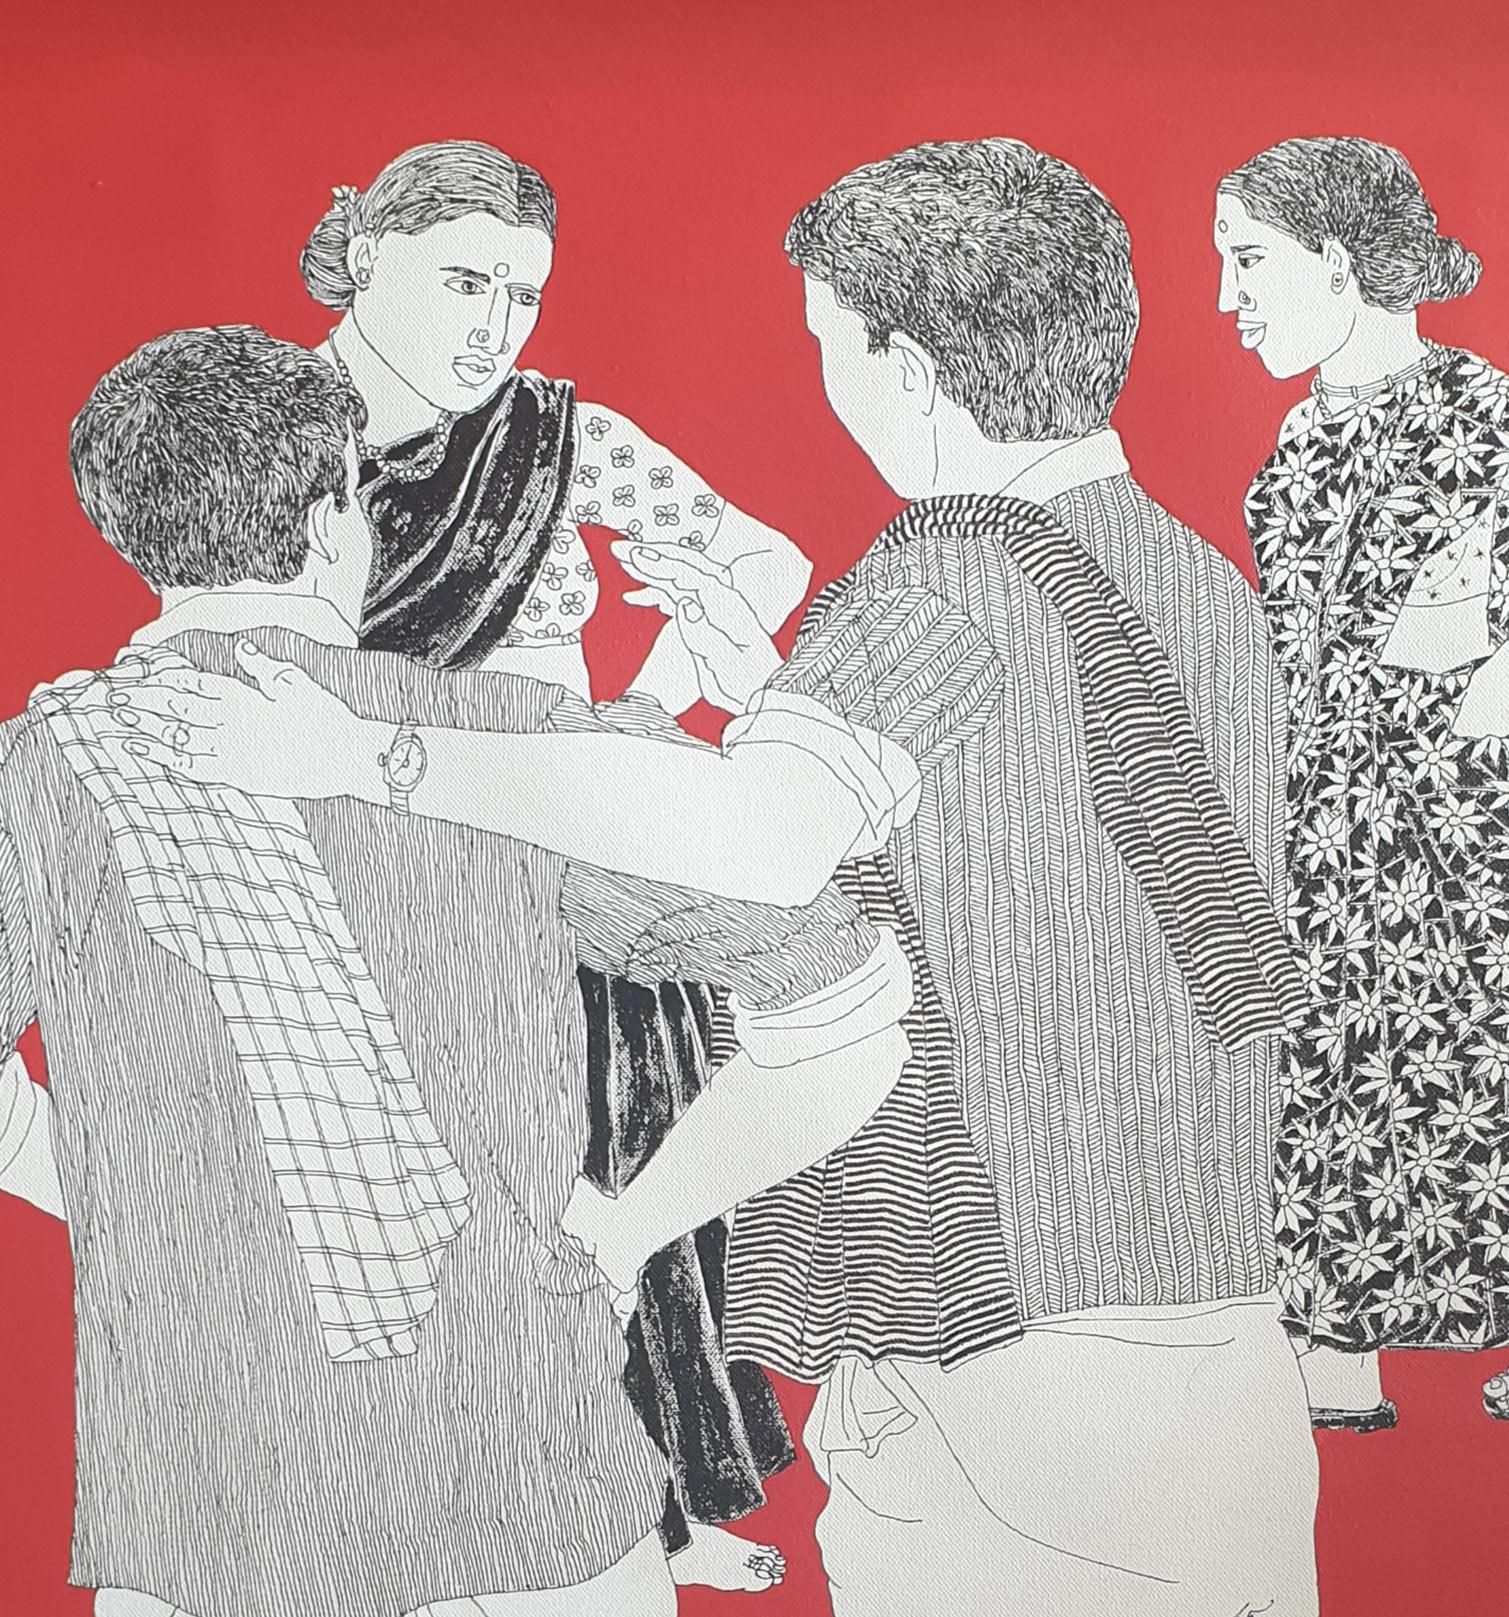 Telengana Men & Women, Gossip, Acrylic on Canvas, Red by Indian Artist